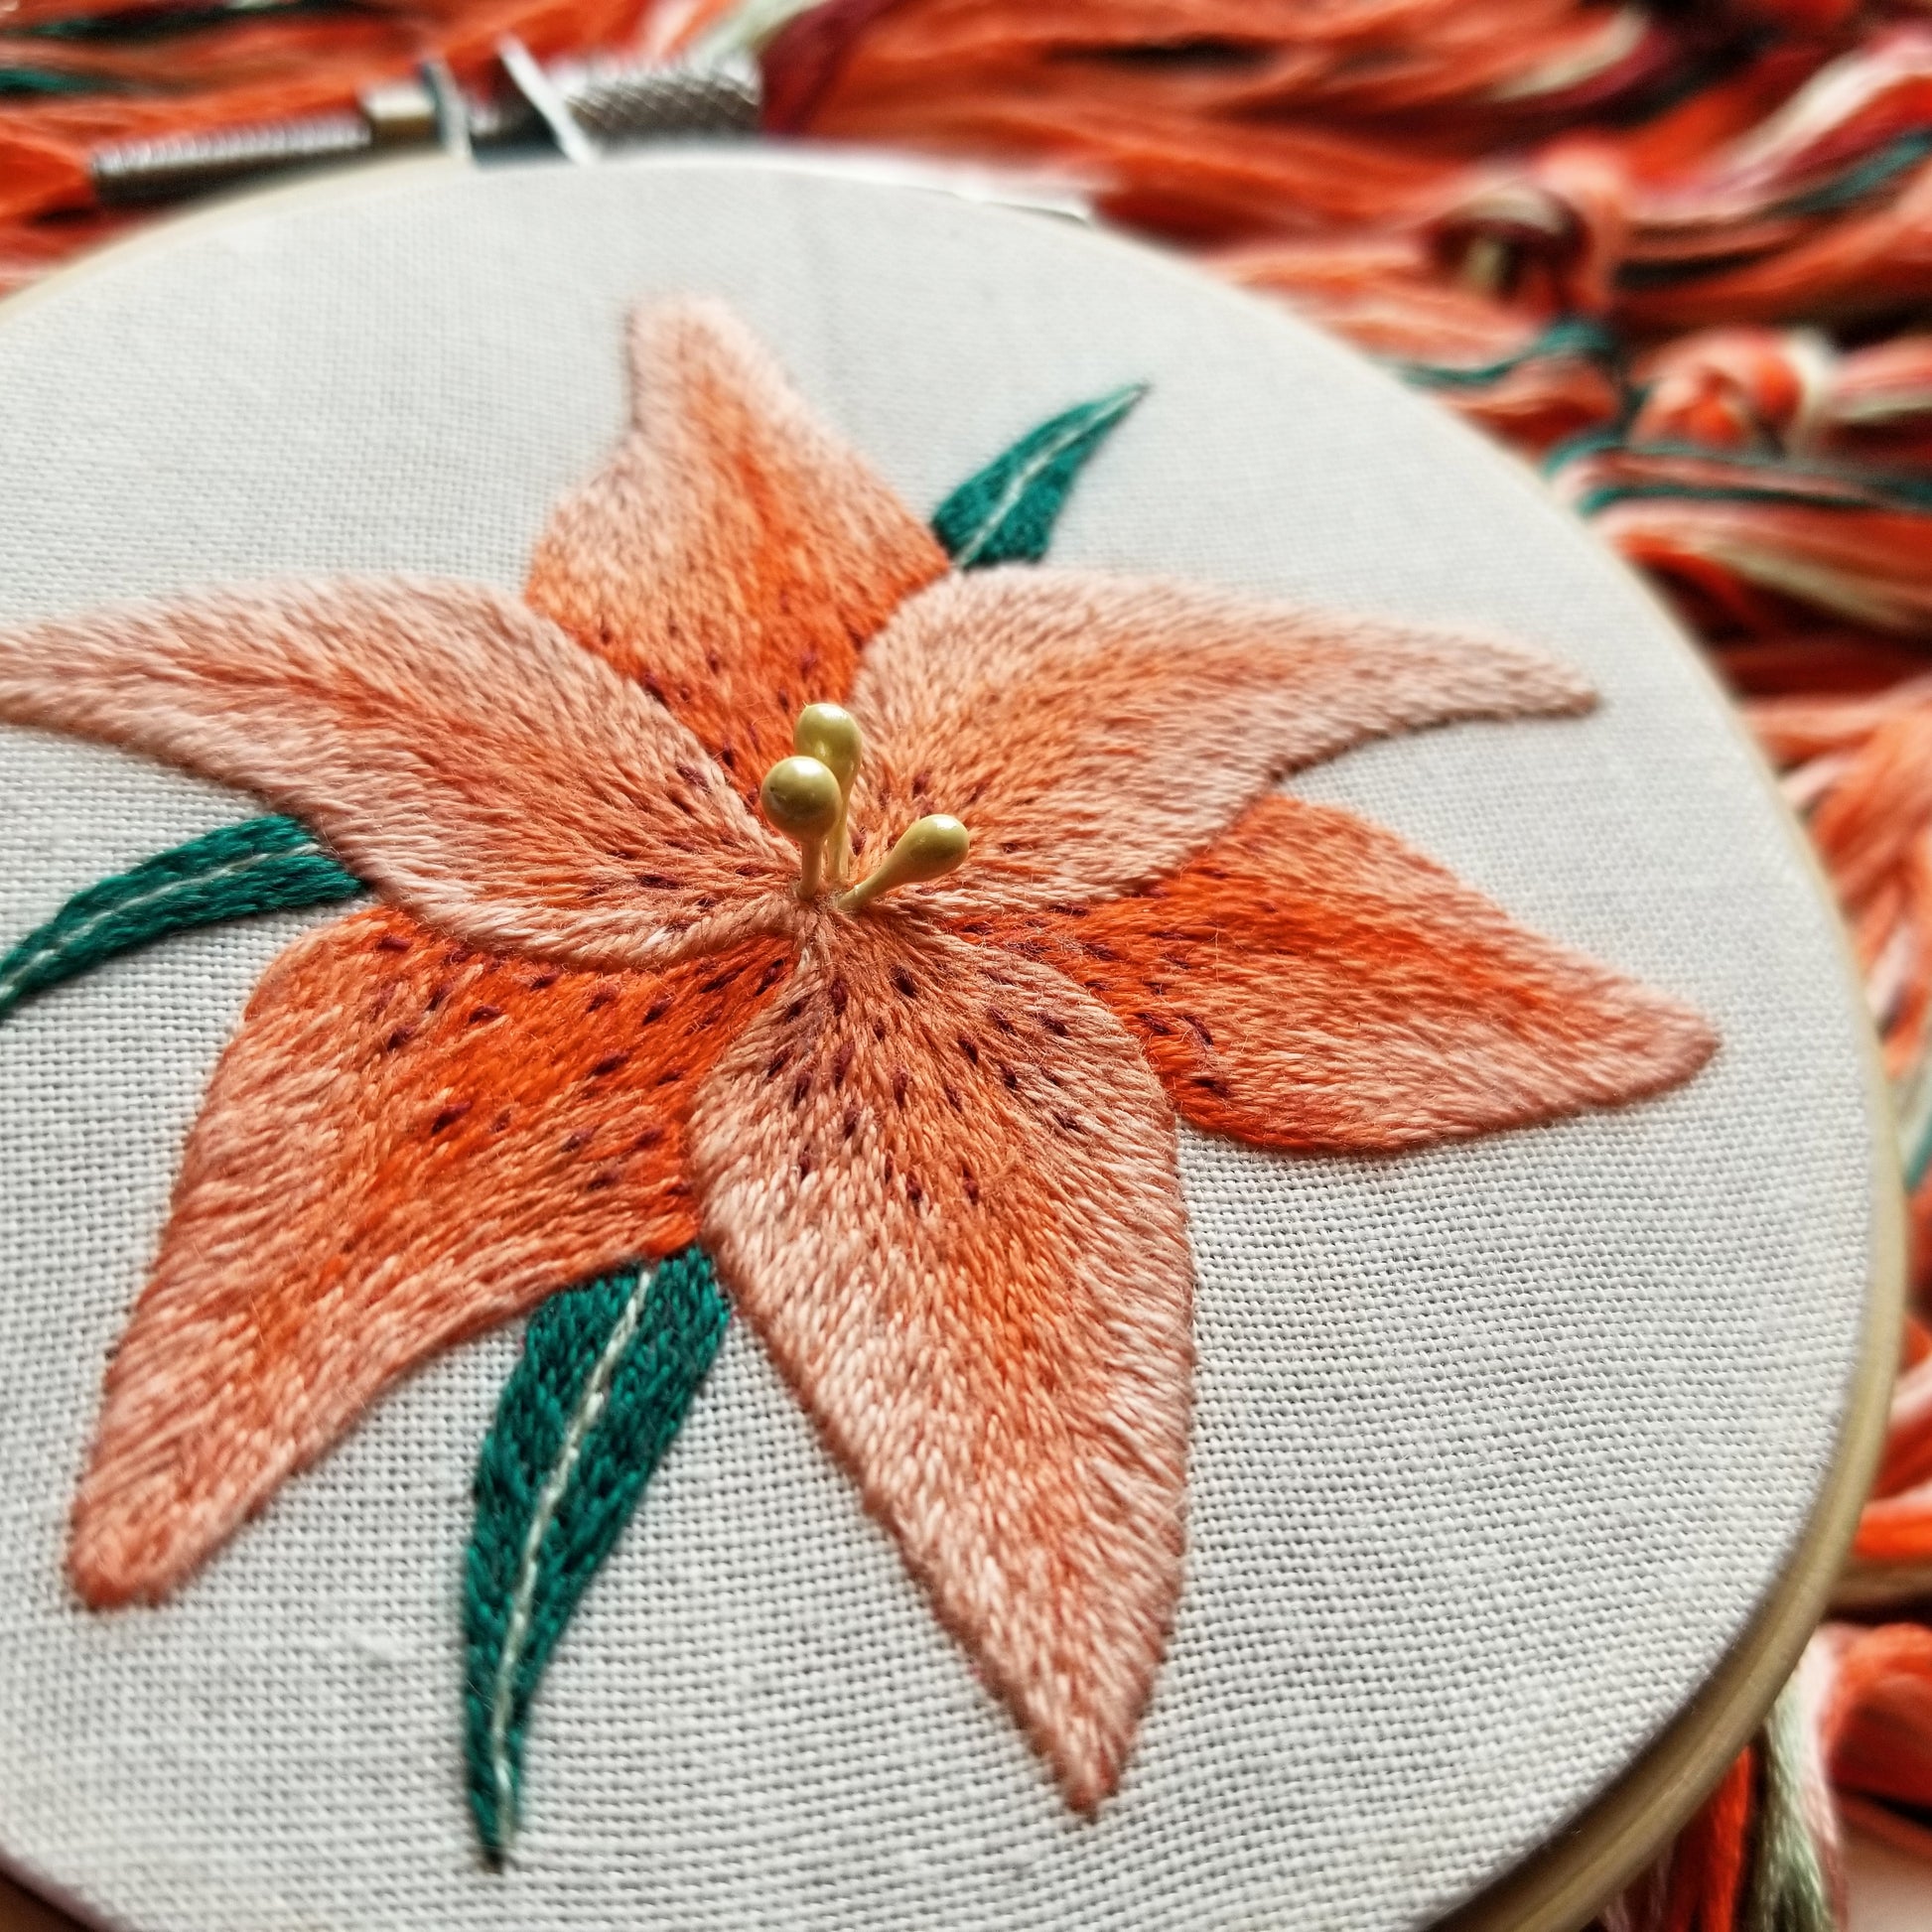 Pretty Lily Stitched Embroidery Design